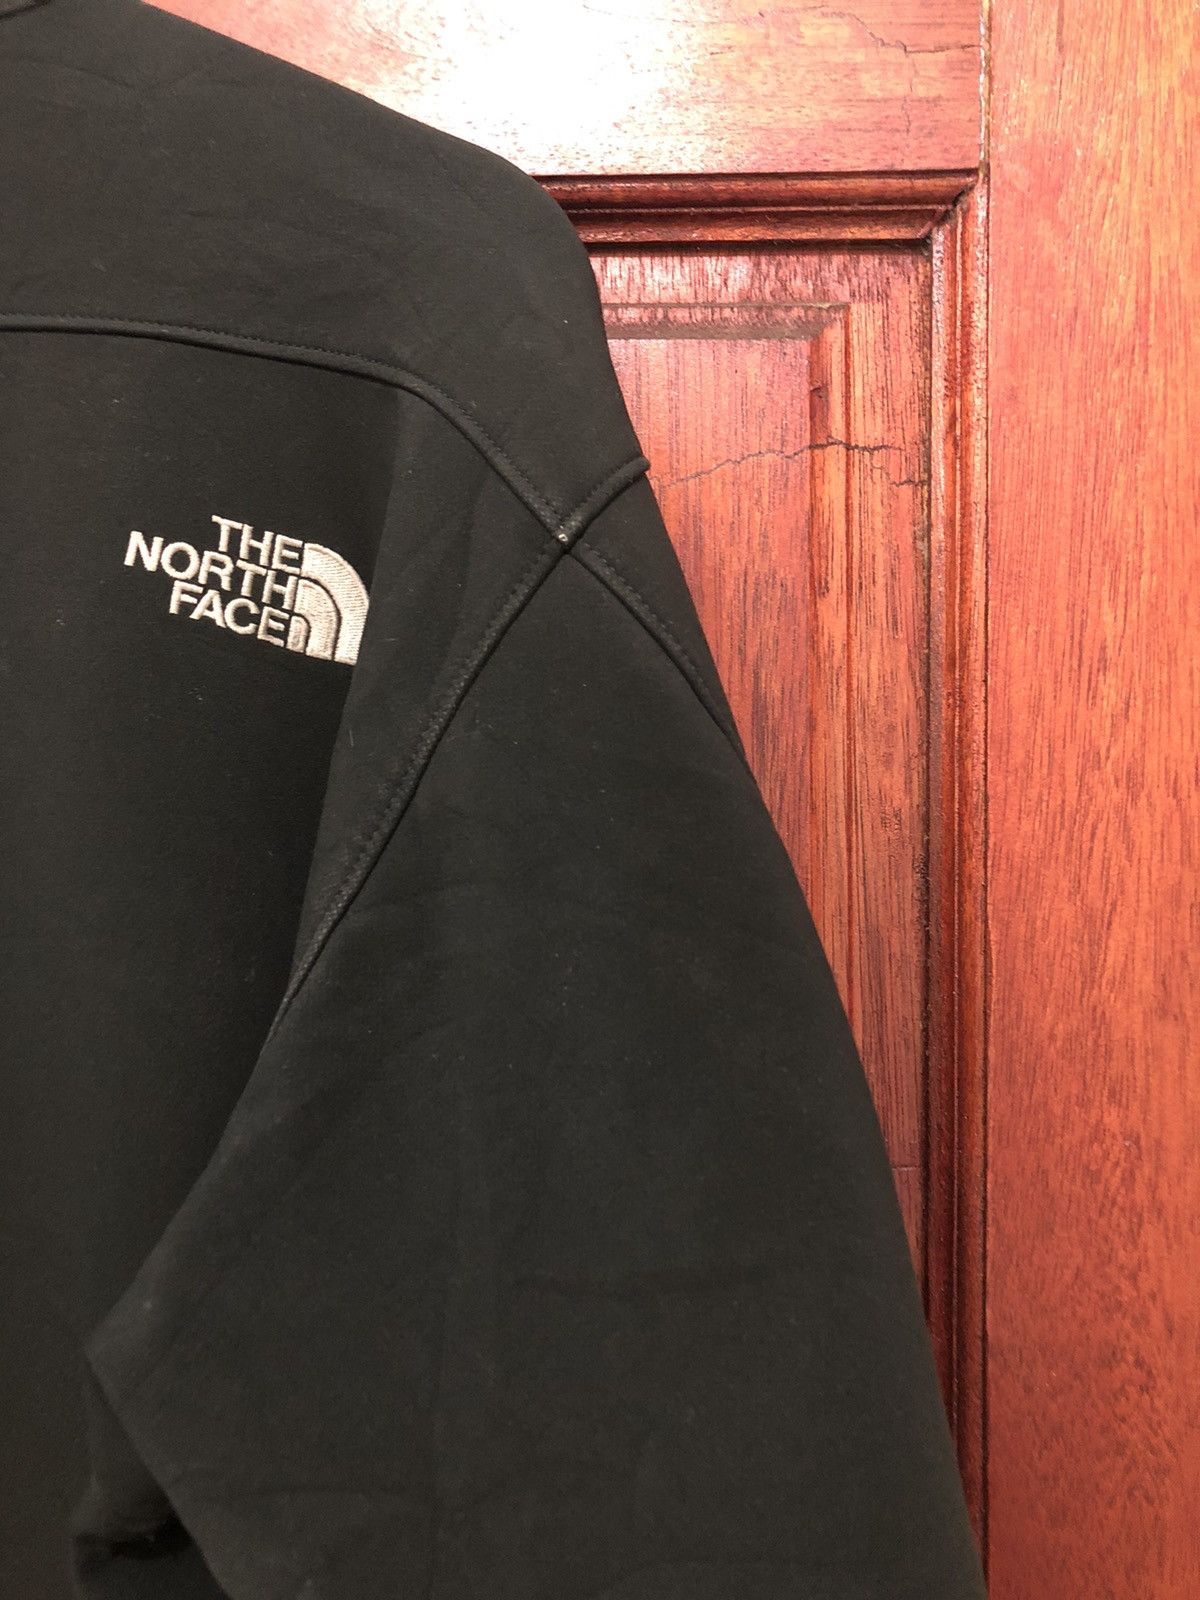 The North Face X Microsoft Game Studios Jacket 2007 - 6